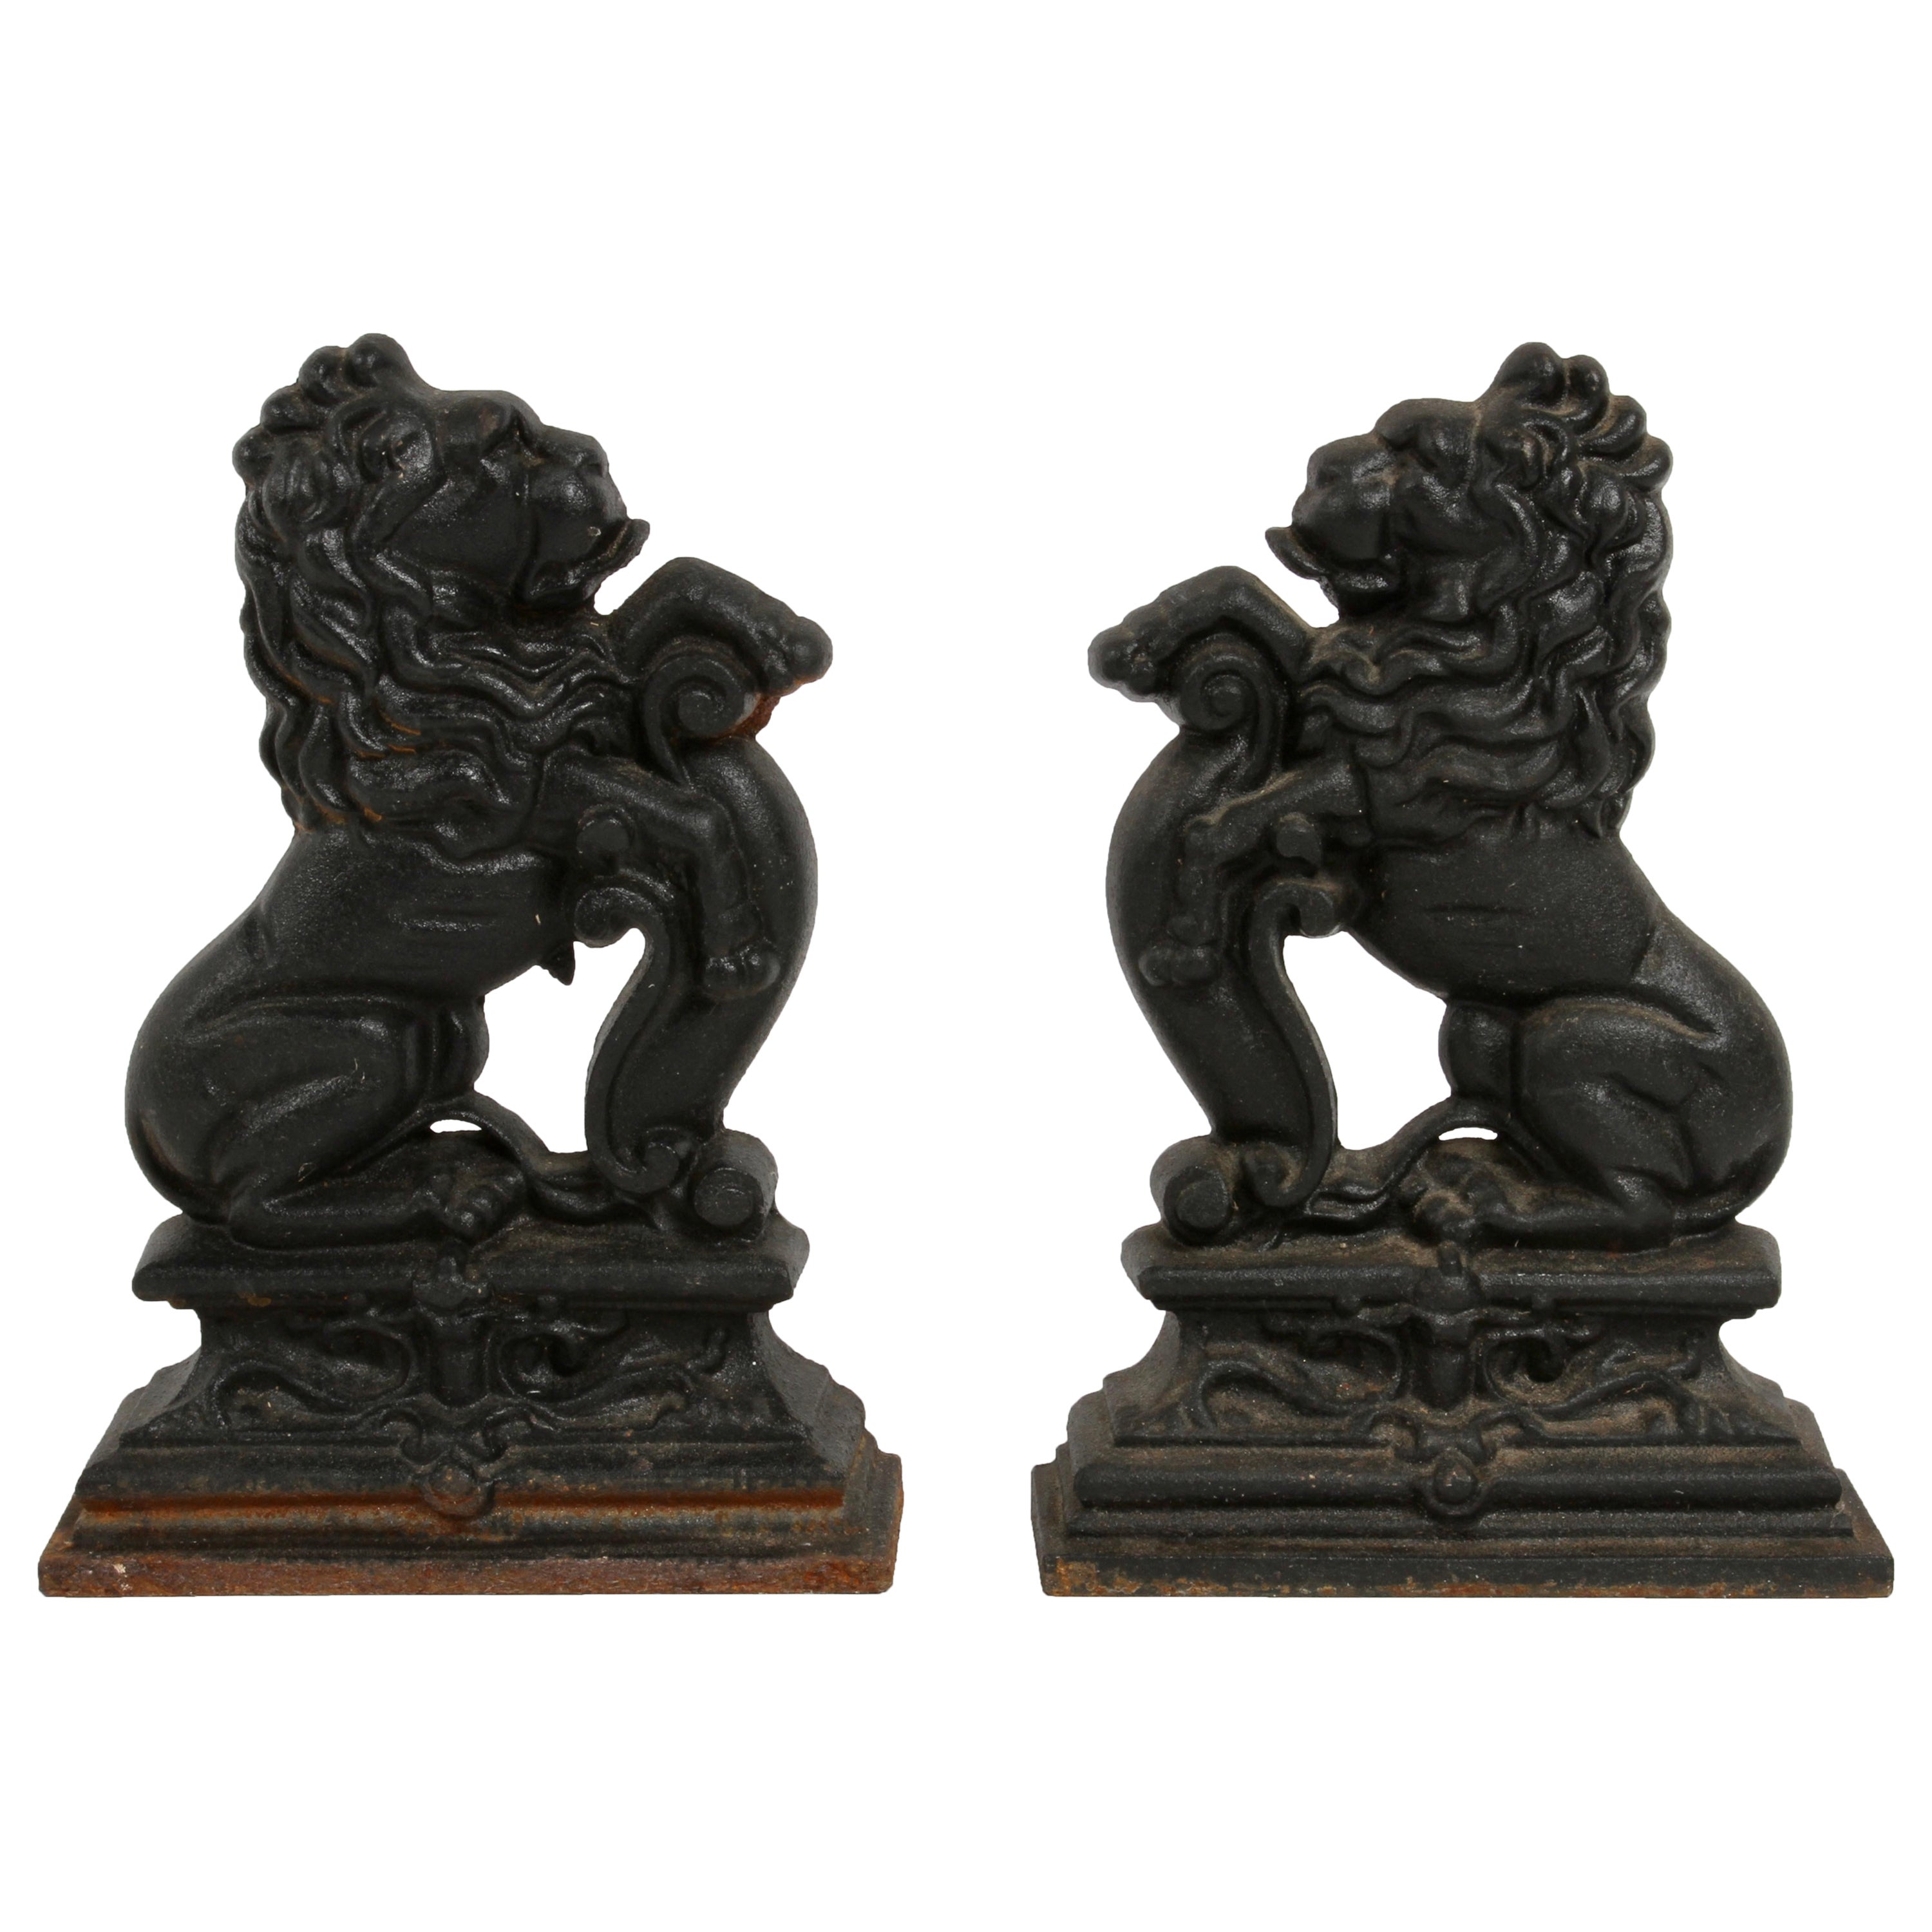 Pair of Cast Iron Andirons or Fire Dogs of Rampant Lions Resting on Shield